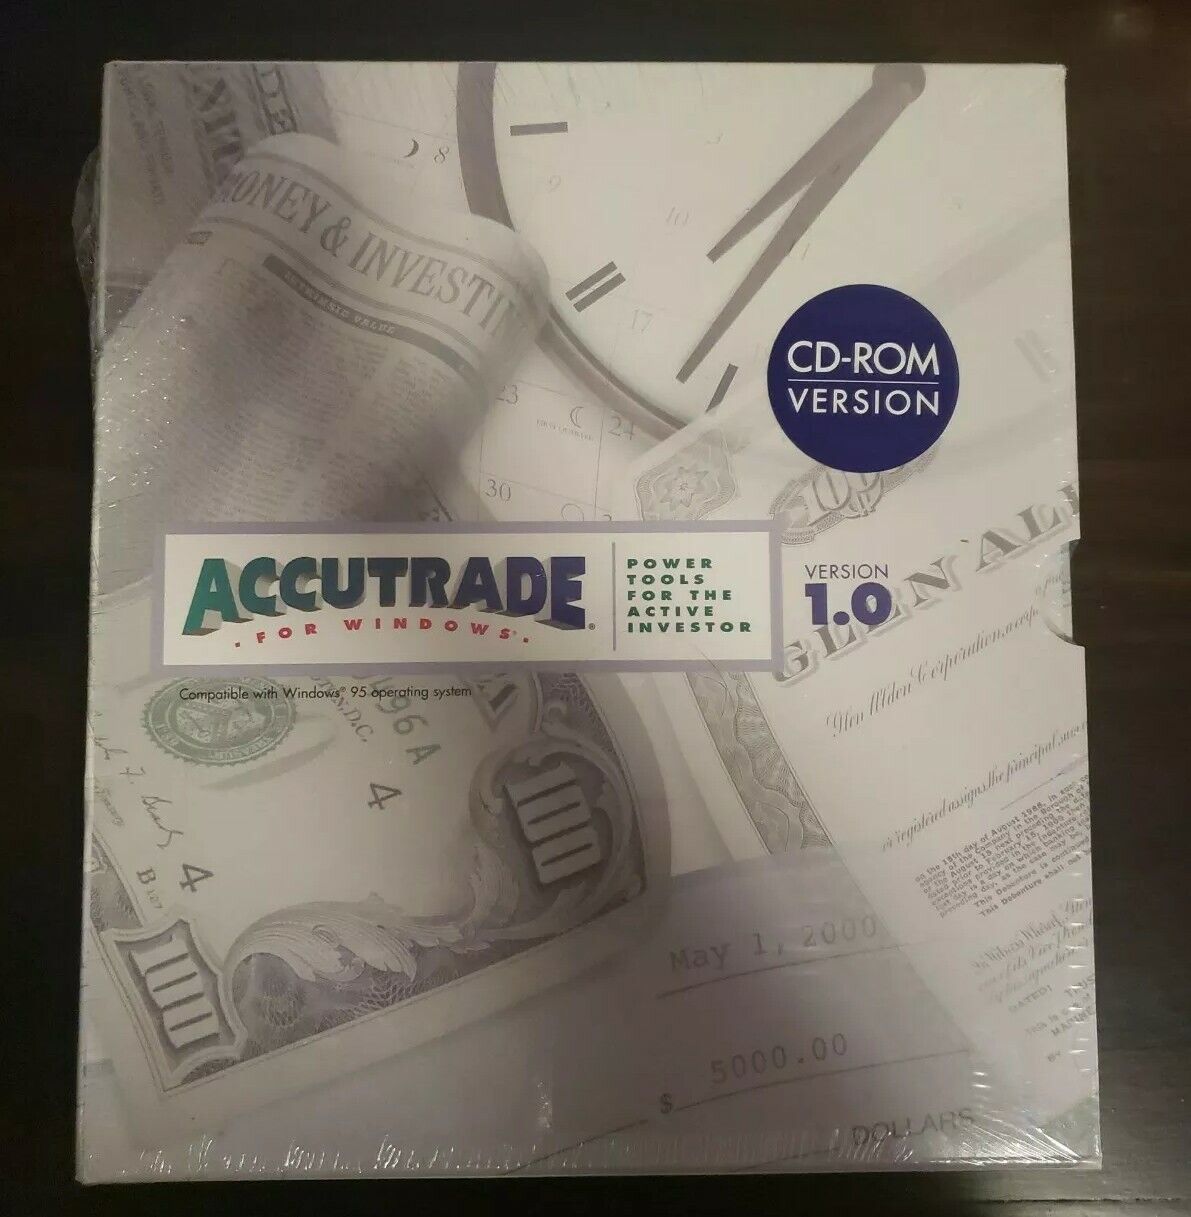  ACCUTRADE 1.0 WINDOWS PC TRADING SOFTWARE FOR Power Tools For Finance Investors